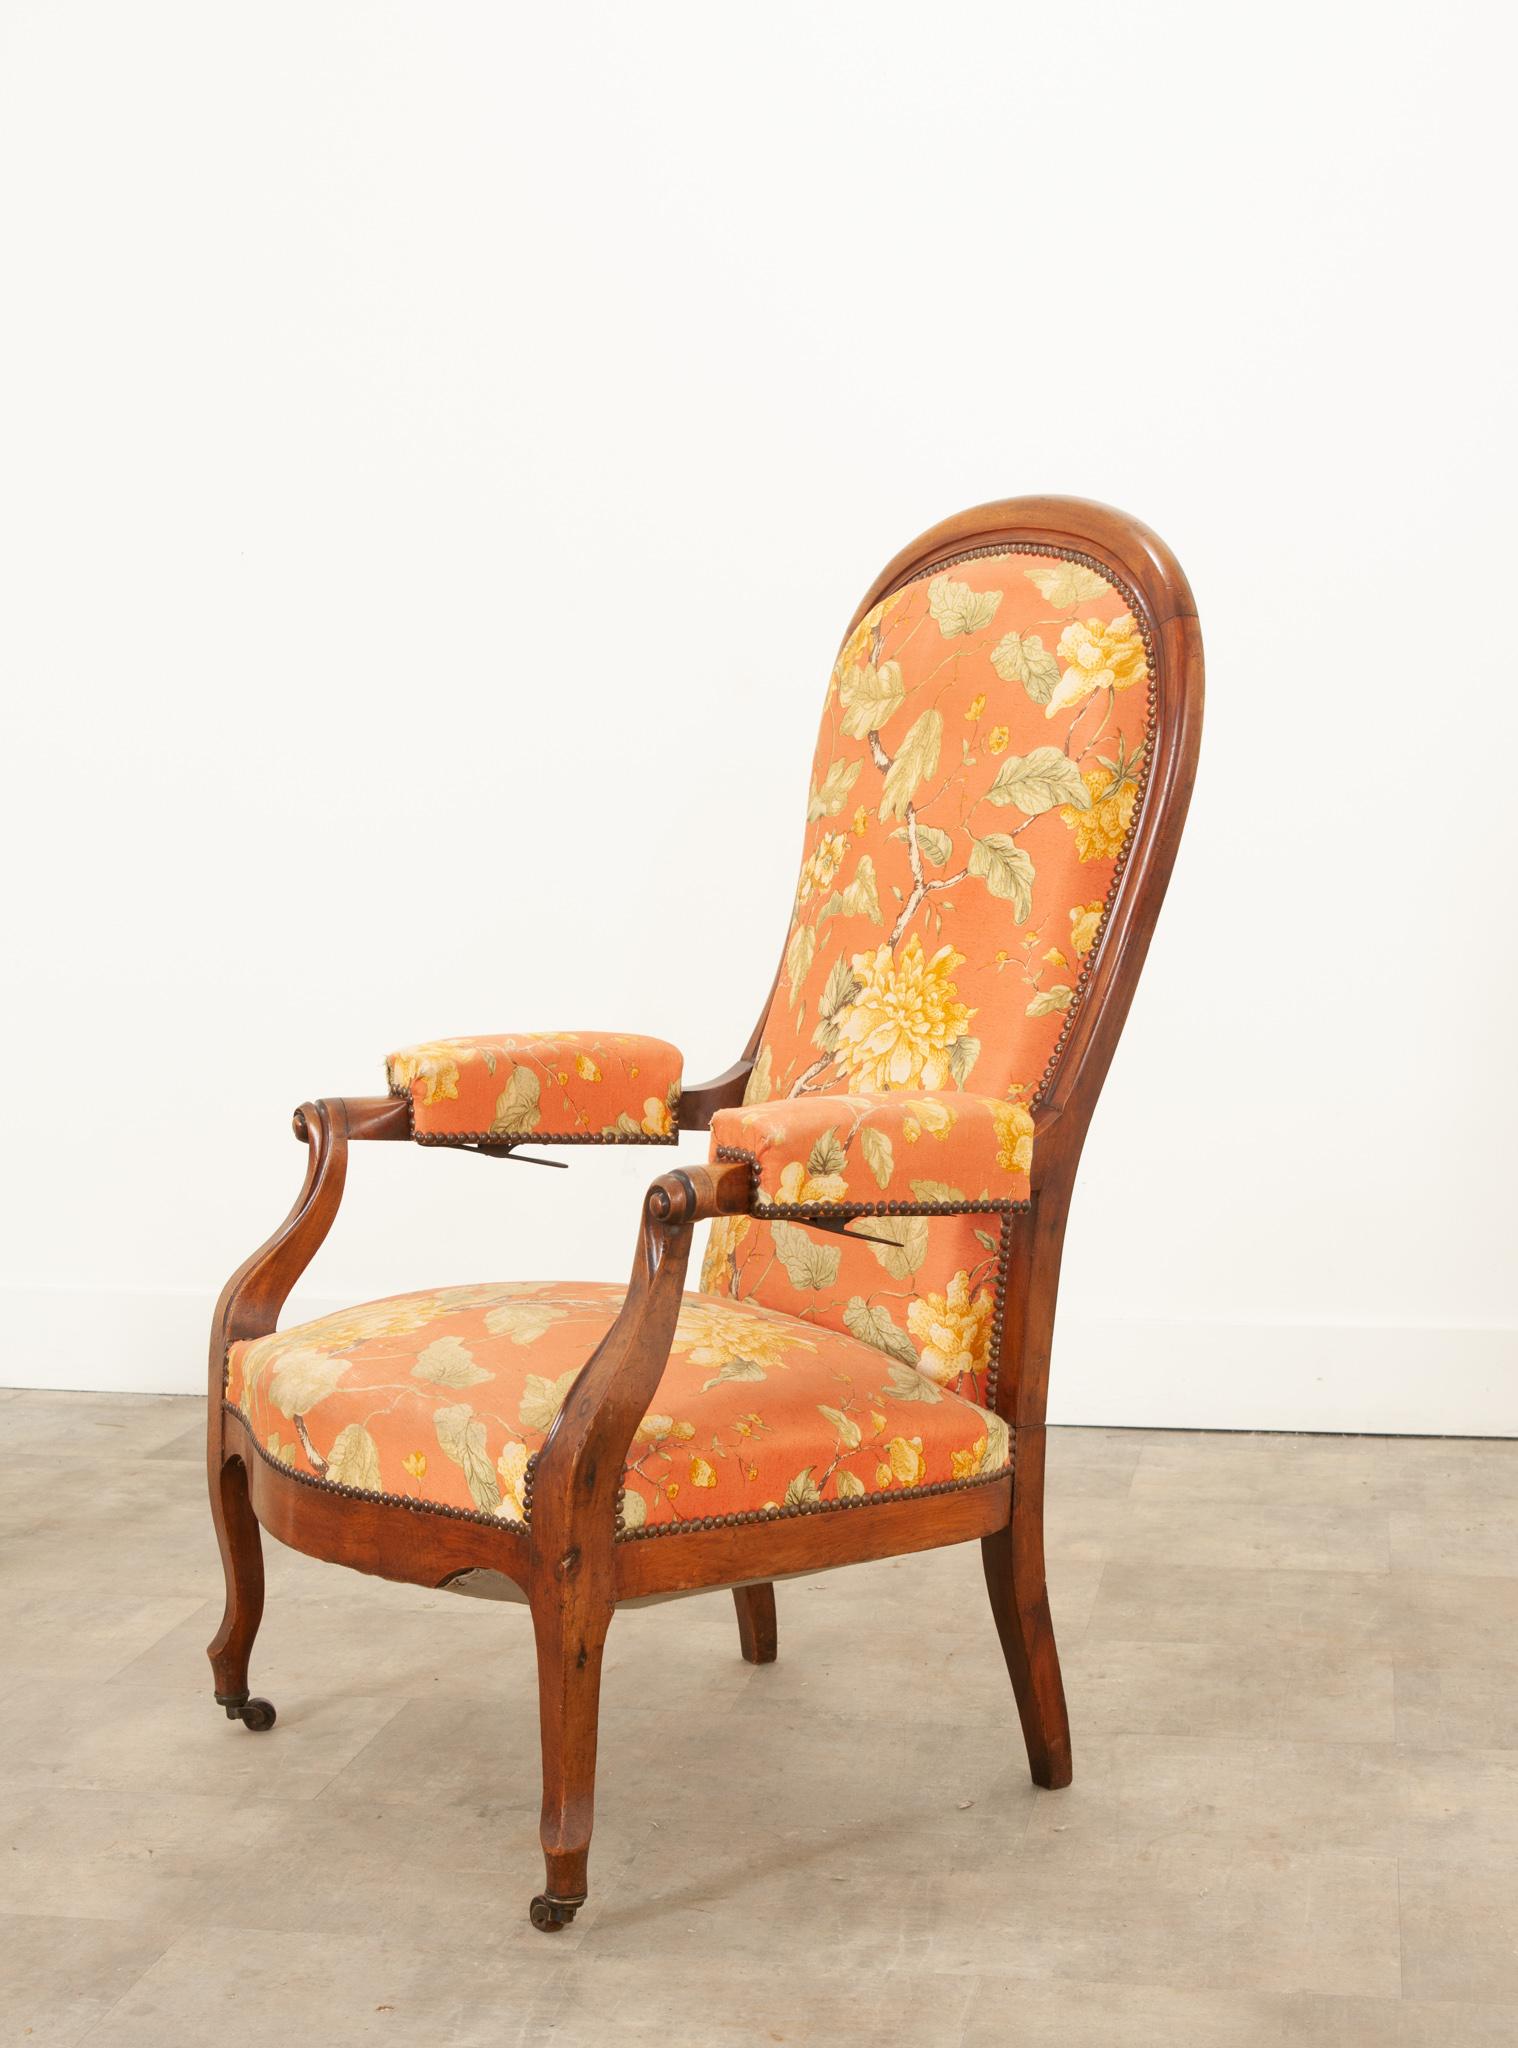 A rare 19th century English mahogany reclining high back arm chair with floral upholstery and under arm metal reclining mechanism. A lovely Victorian reclining armchair that is fashionable as well as exceptionally comfortable. Of elegant